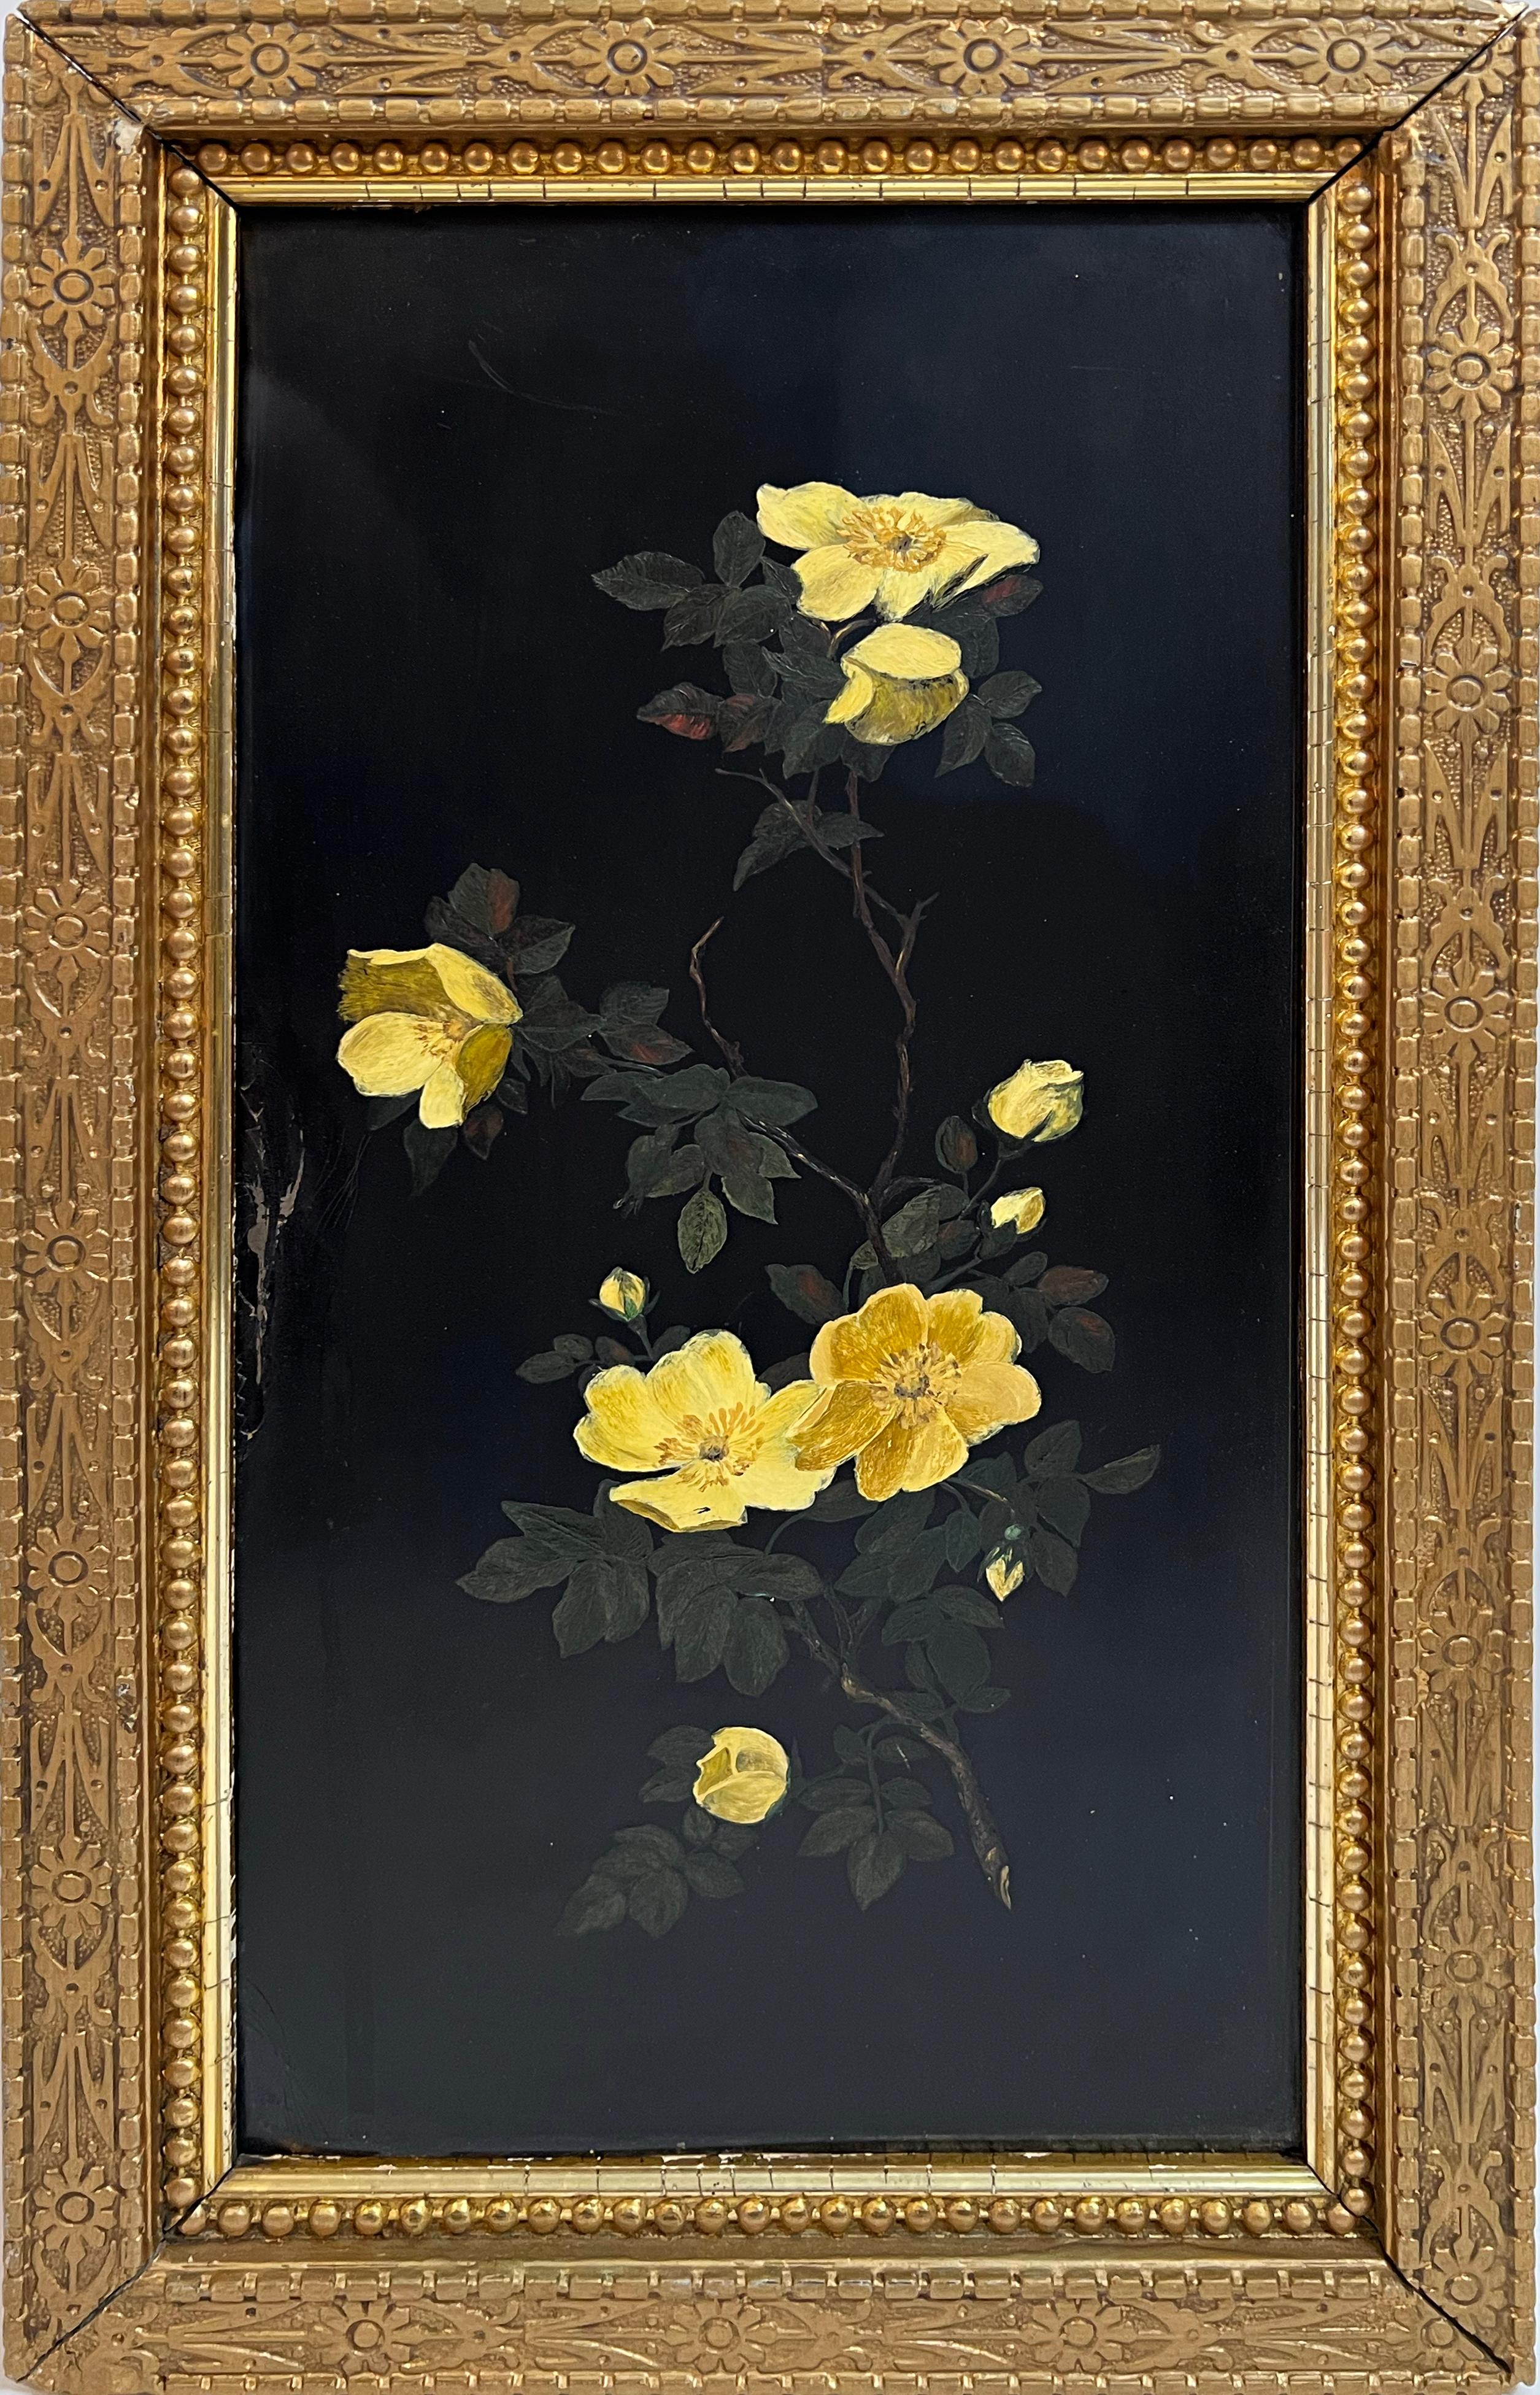 Antique American School 19th Century Flower Still Life Original Oil Painting - Black Still-Life Painting by Unknown